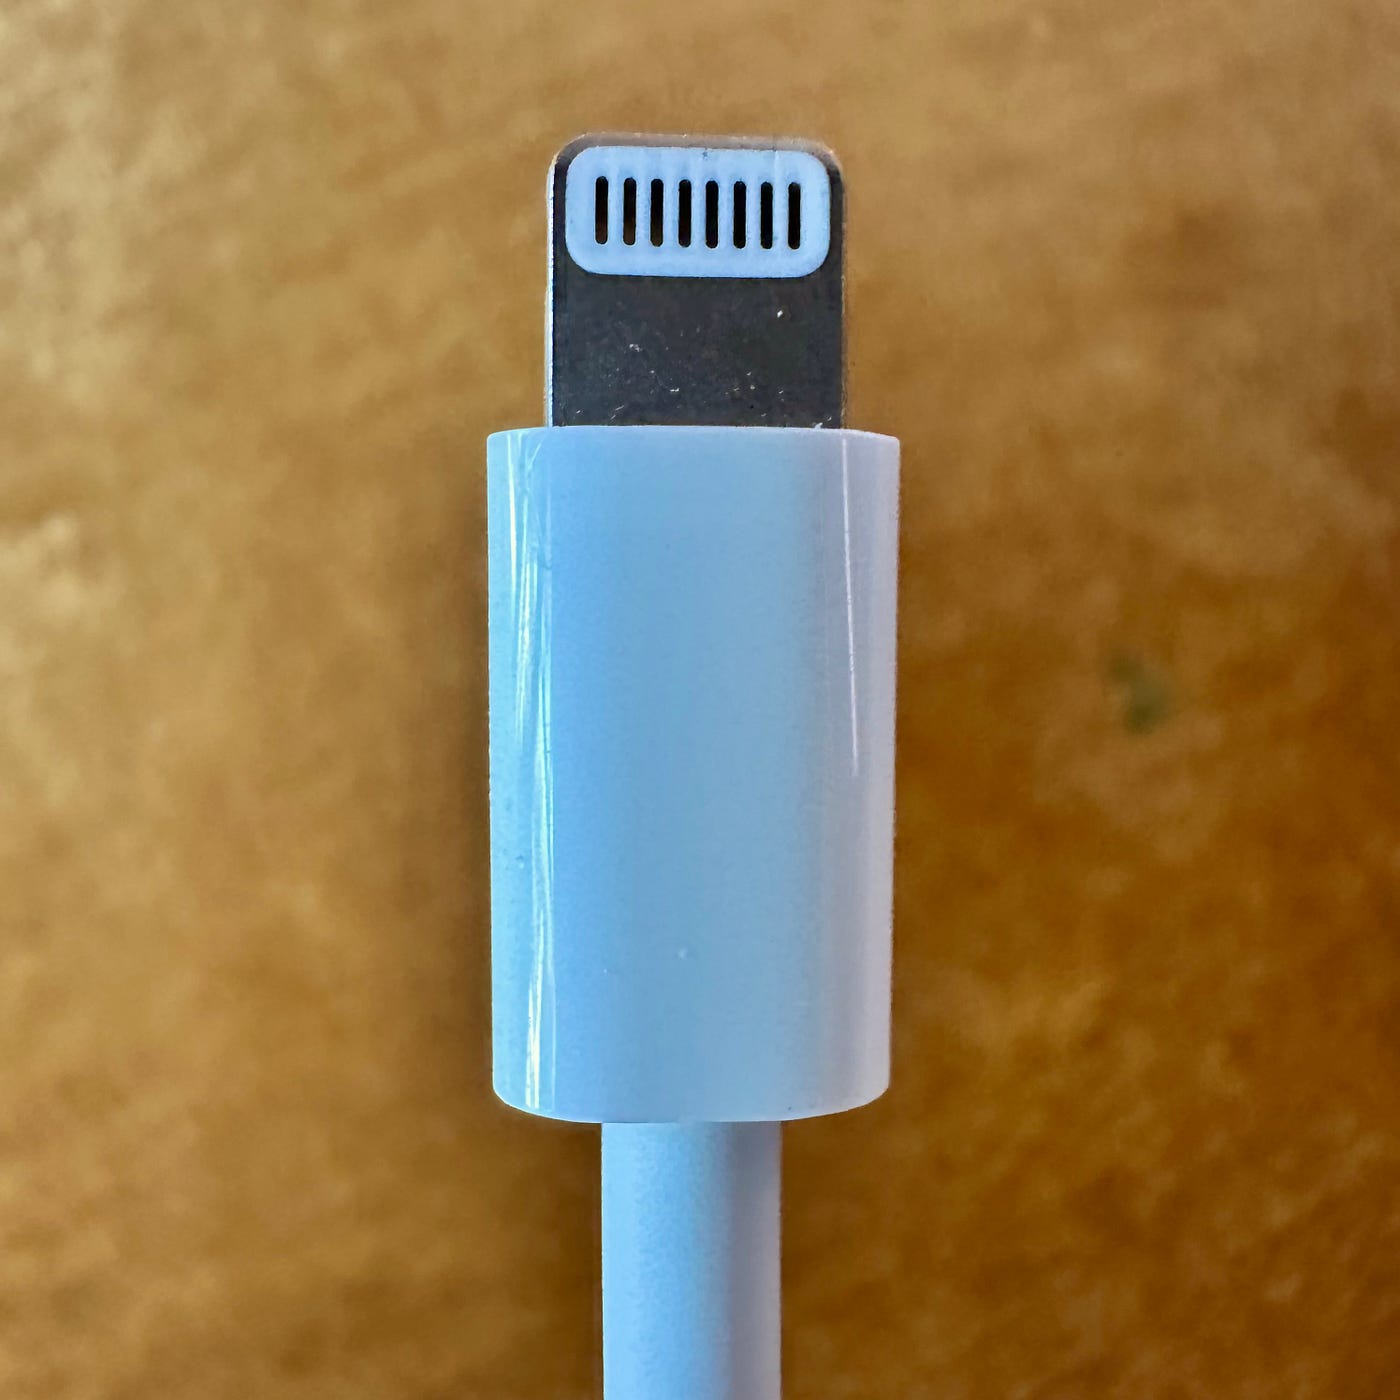 Apple being forced away from lightning charger to reduce global ewaste